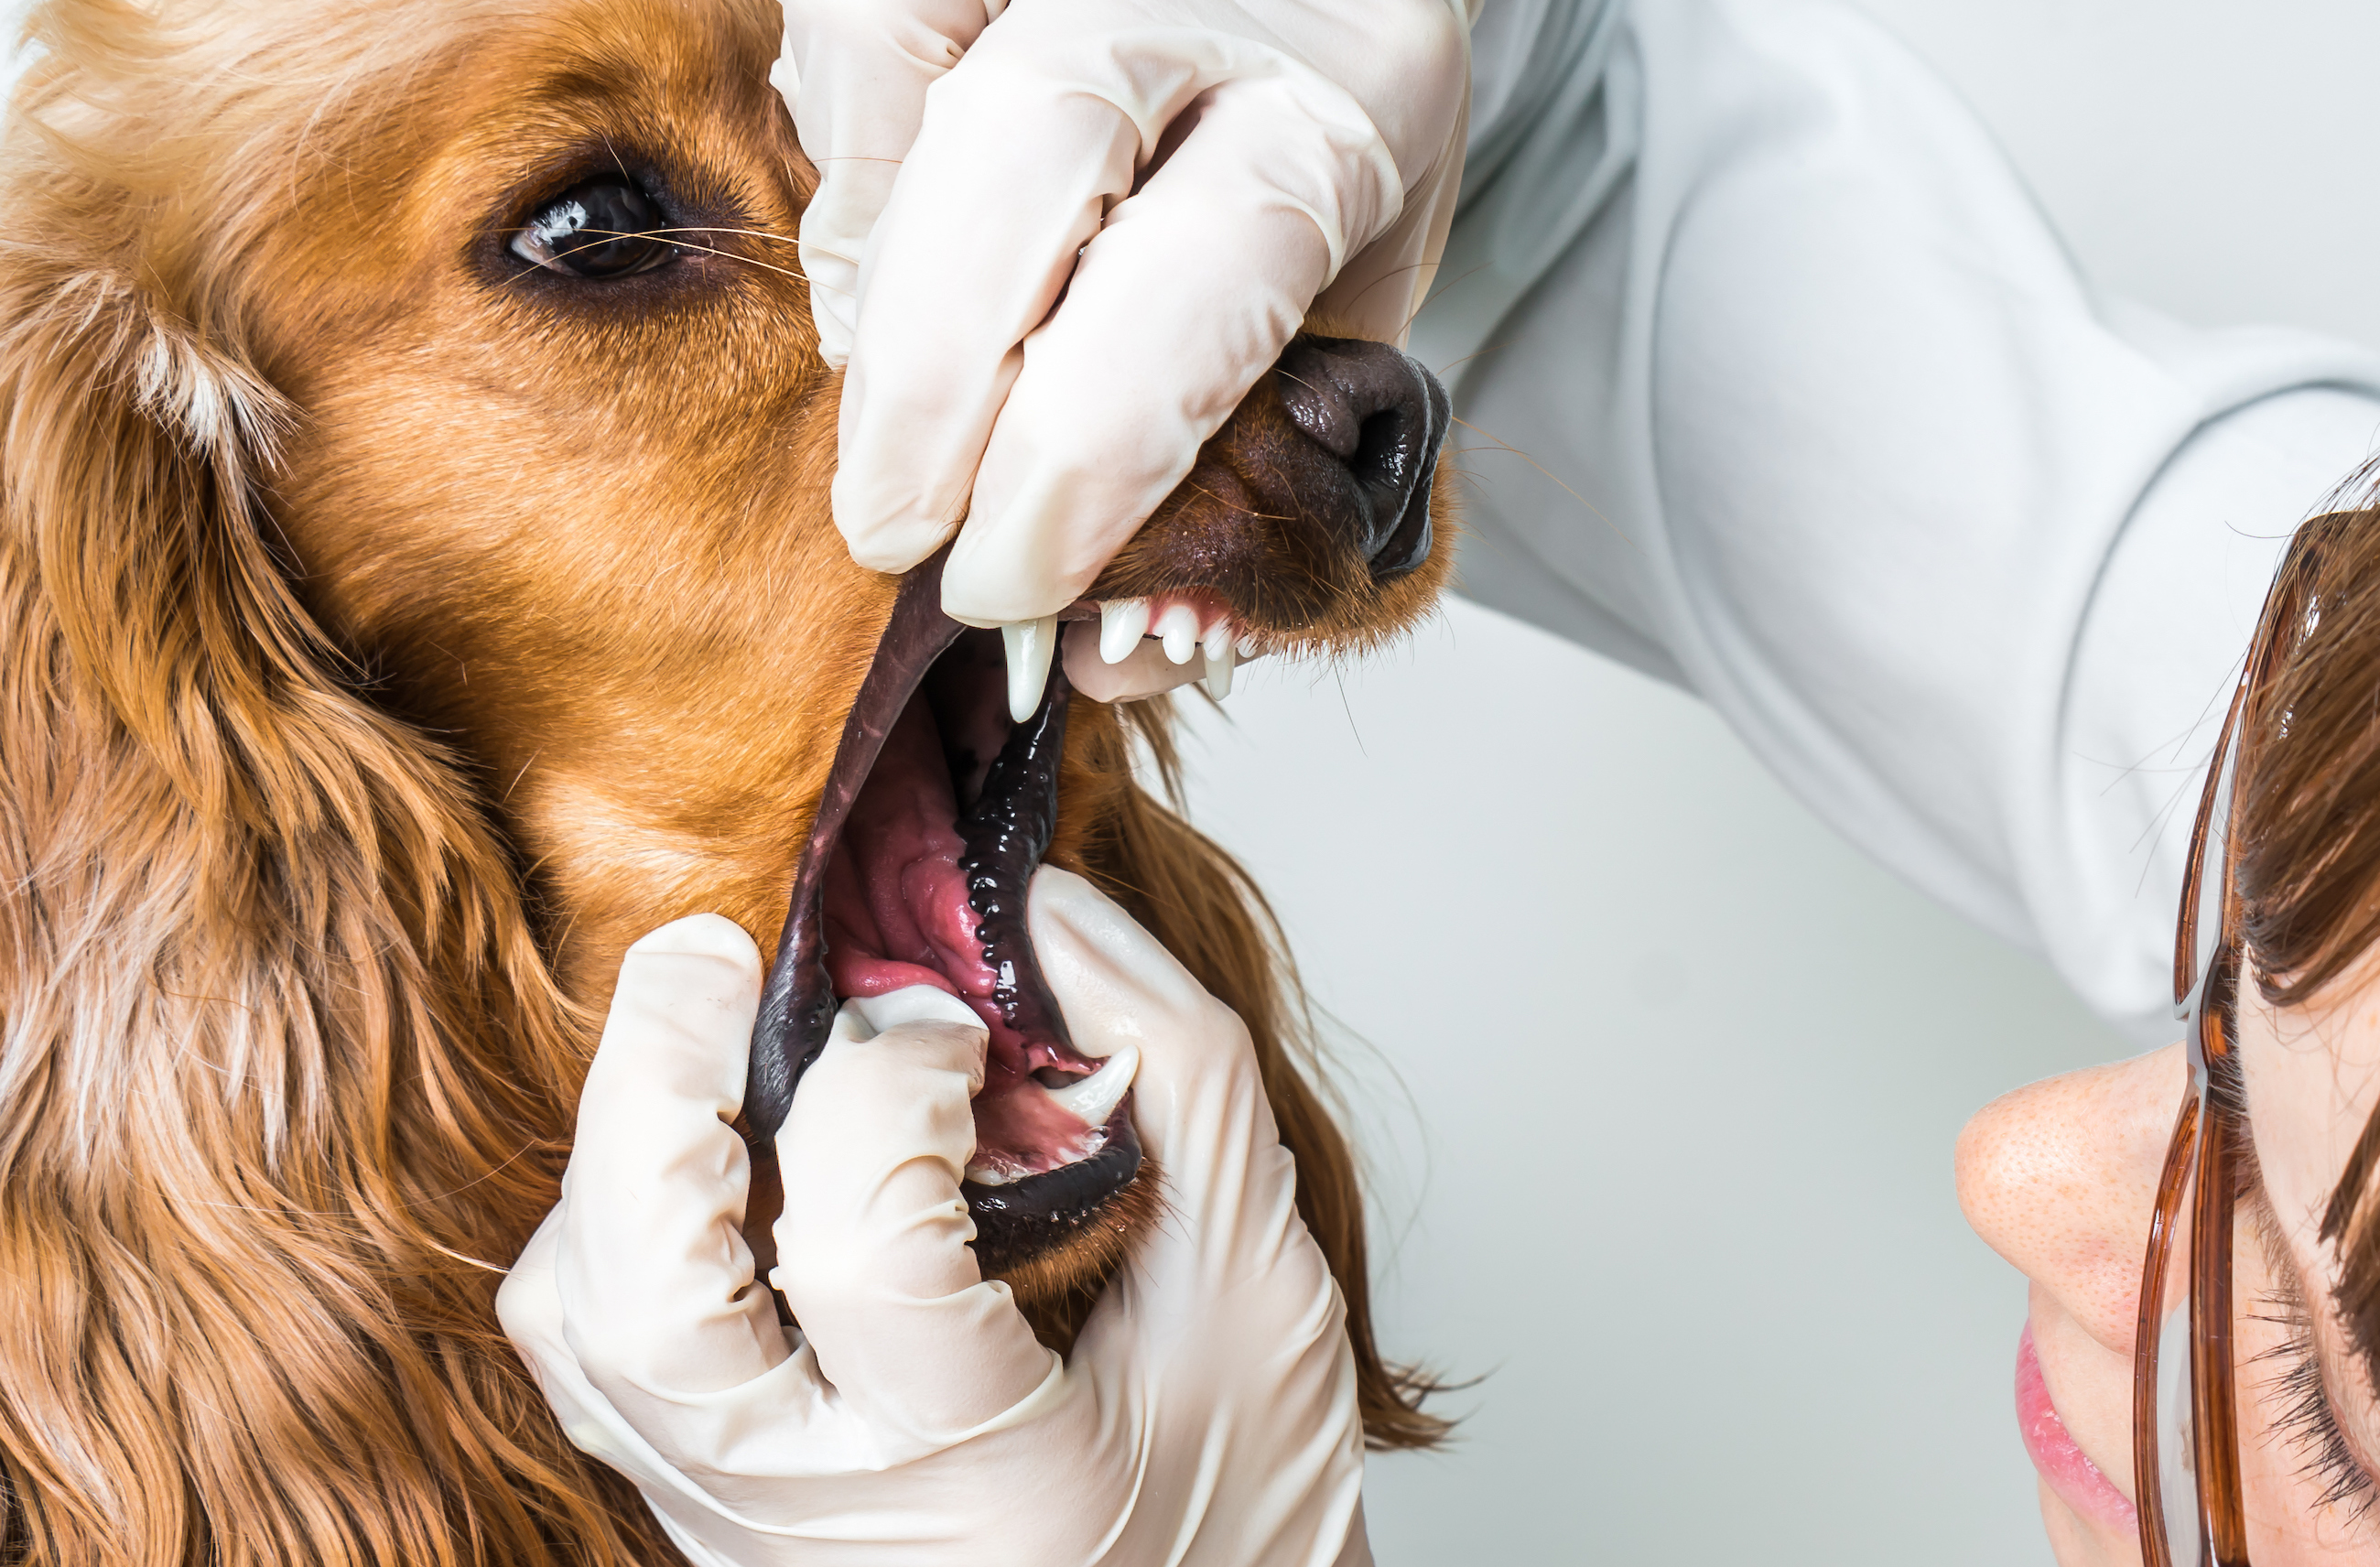 Veterinarian checks teeth to a dog - animal and pet veterinary care concept